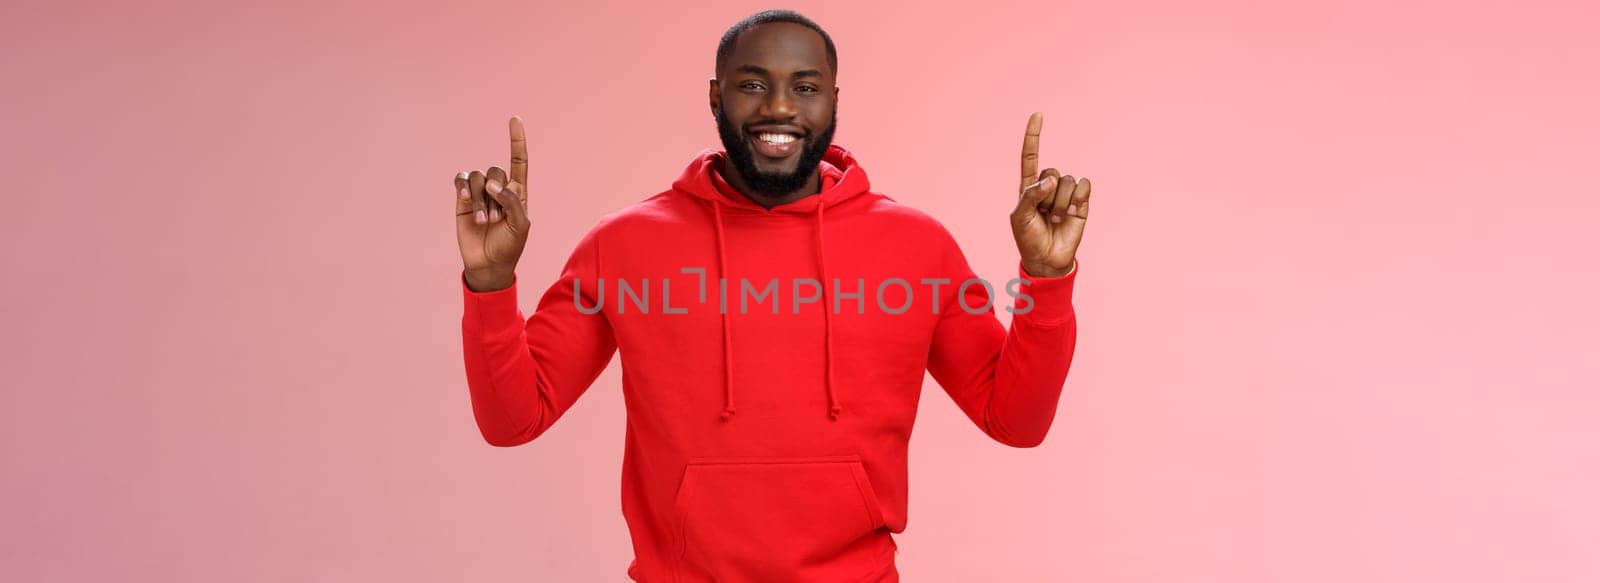 Devious cute african-american bearded guy in red hoodie smiling mysterious know exactly what you want pointing raised index fingers up grinning show perfect copy space promo, pink background.